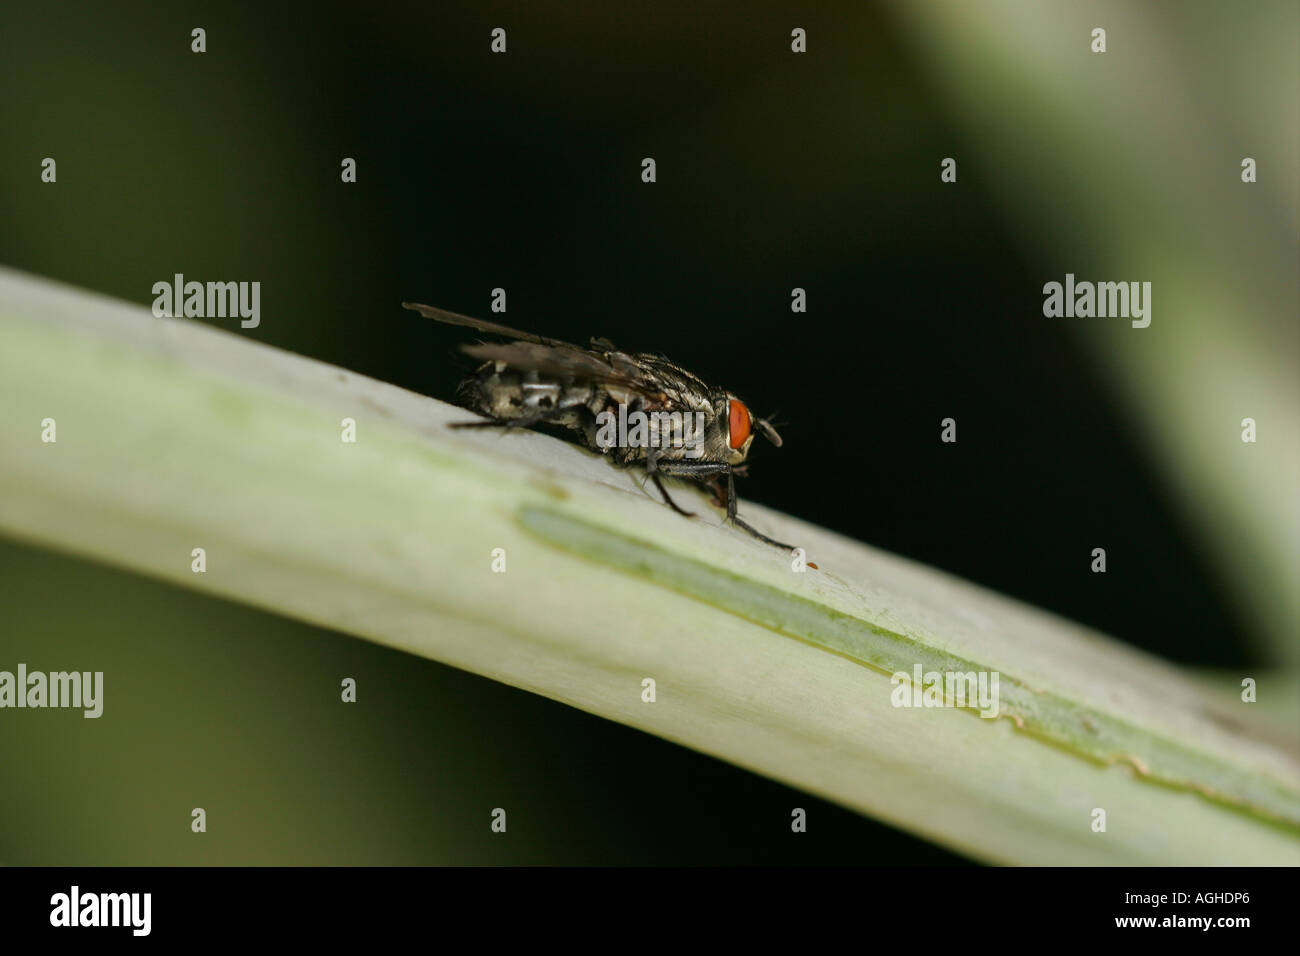 Housefly on stem side view Stock Photo